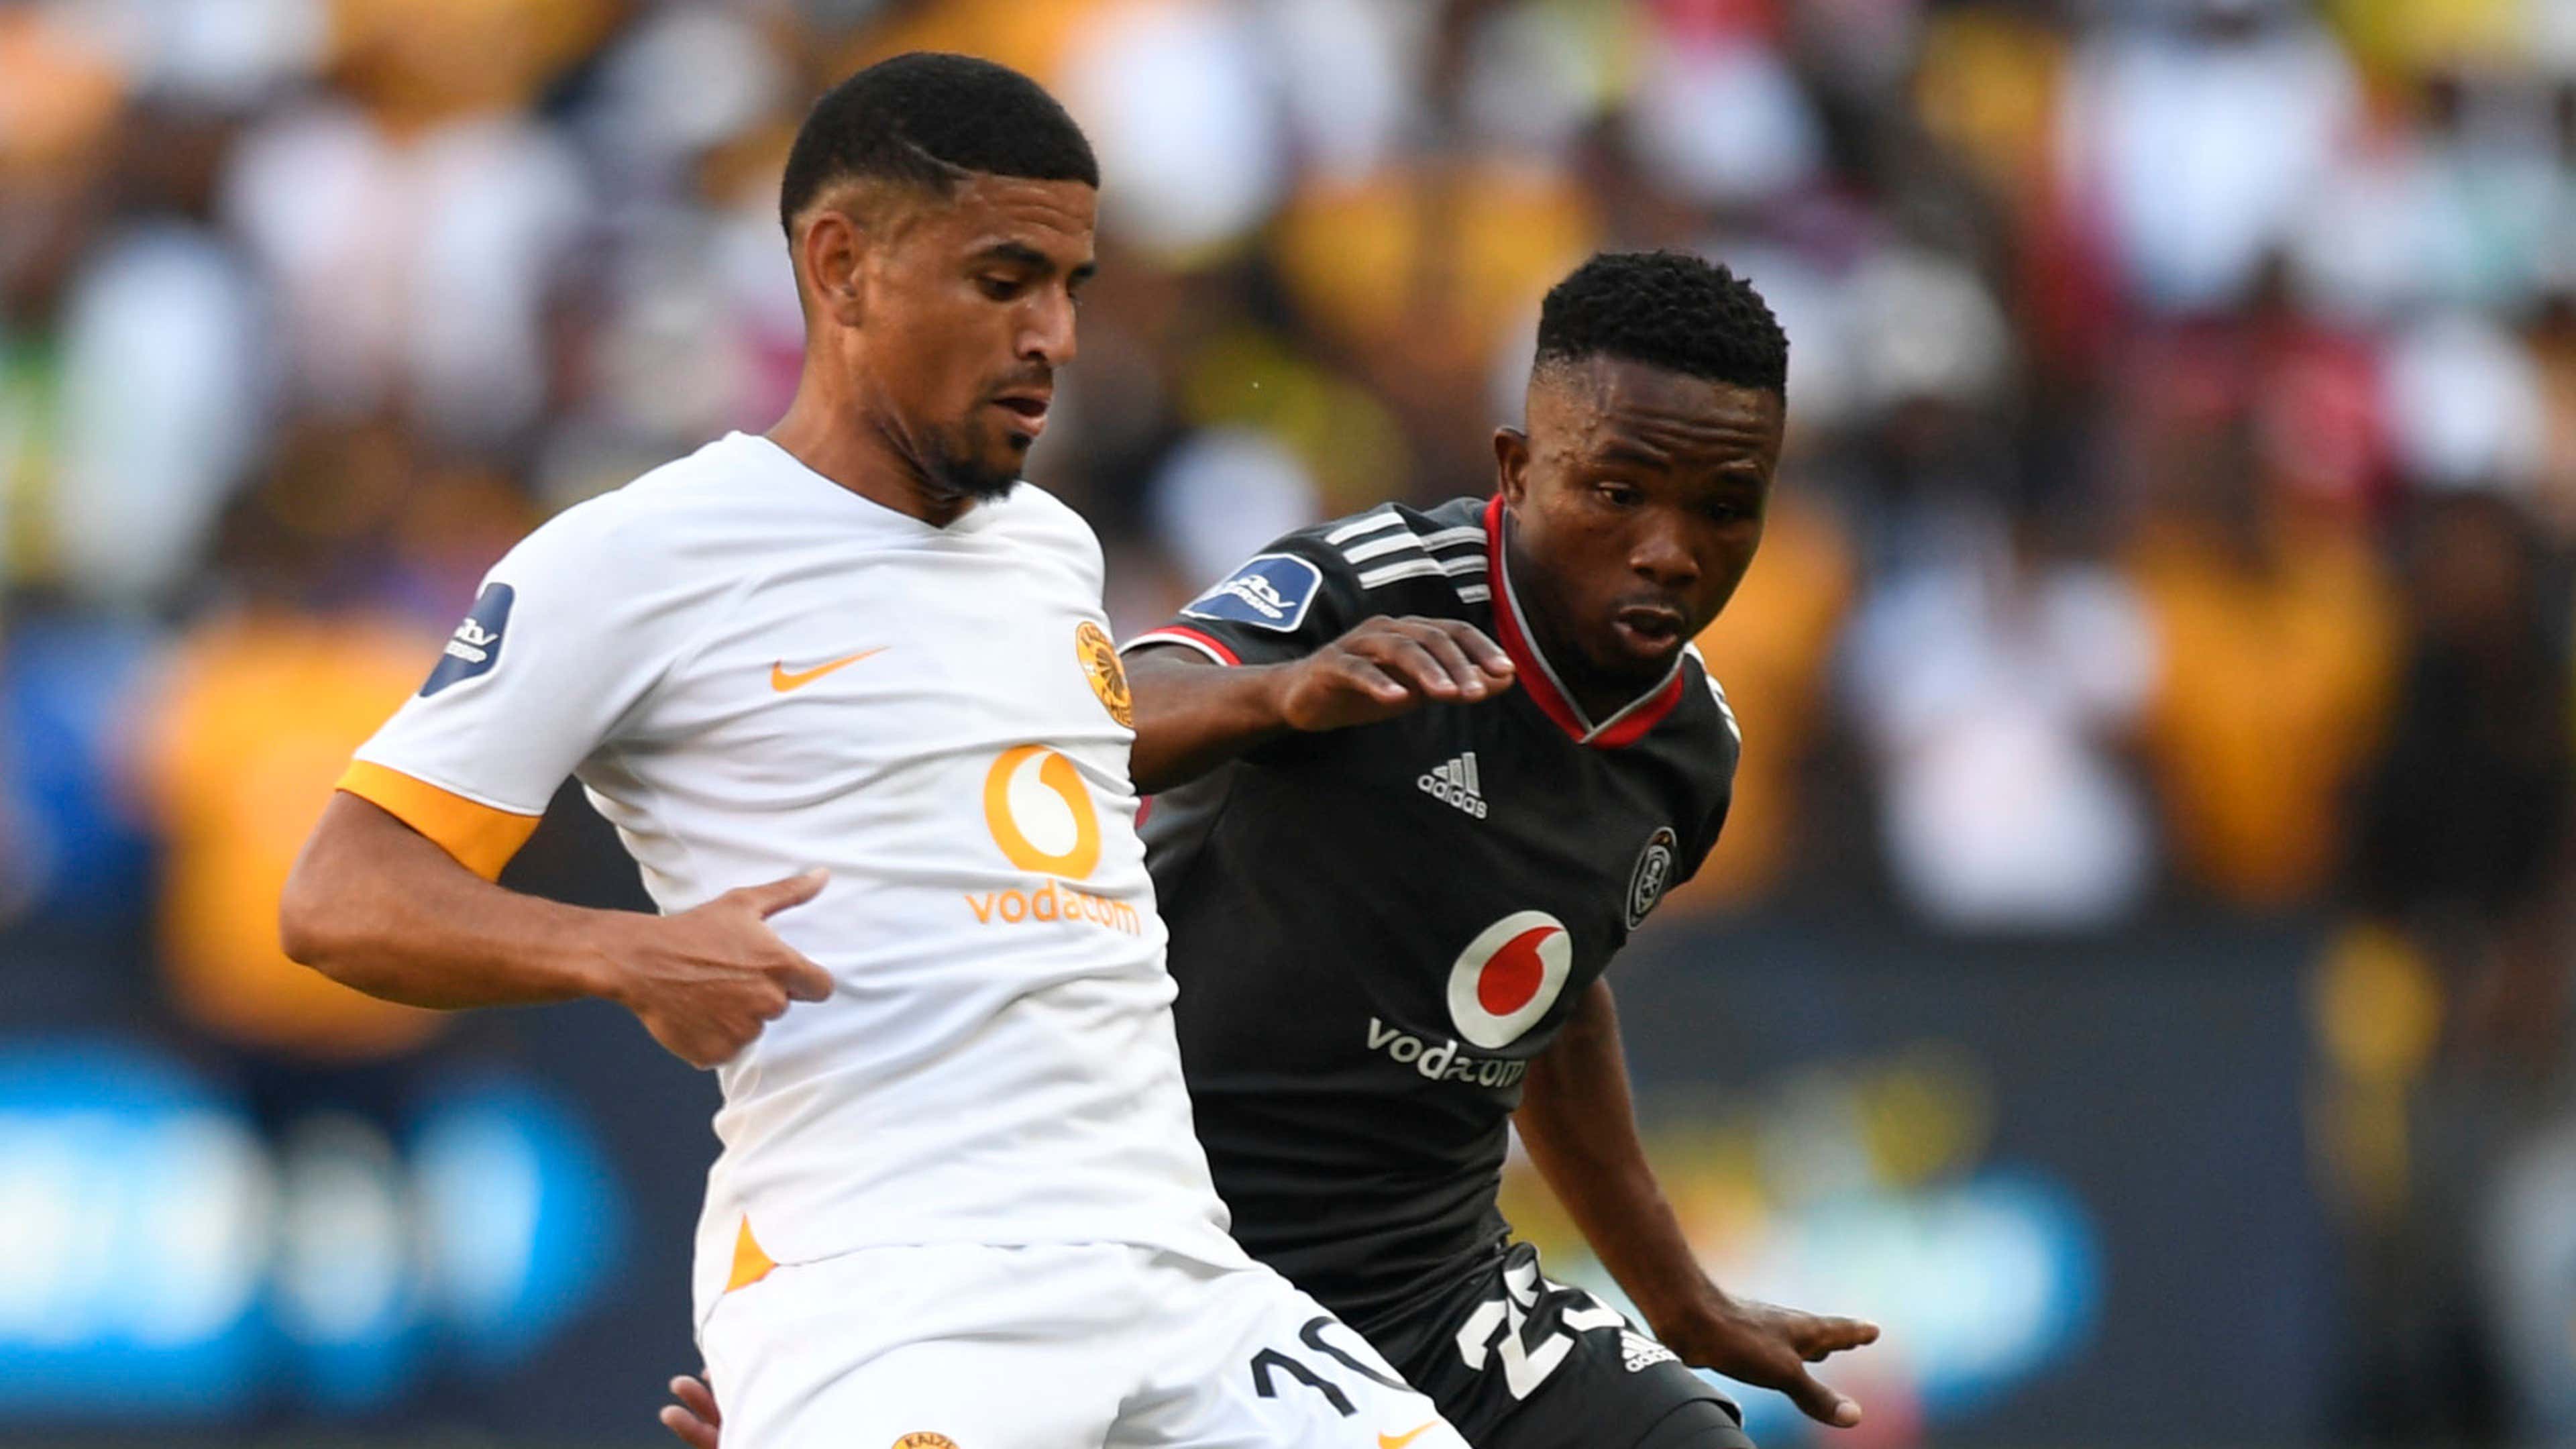 Pirates draw Ethekwini FC in Nedbank Cup